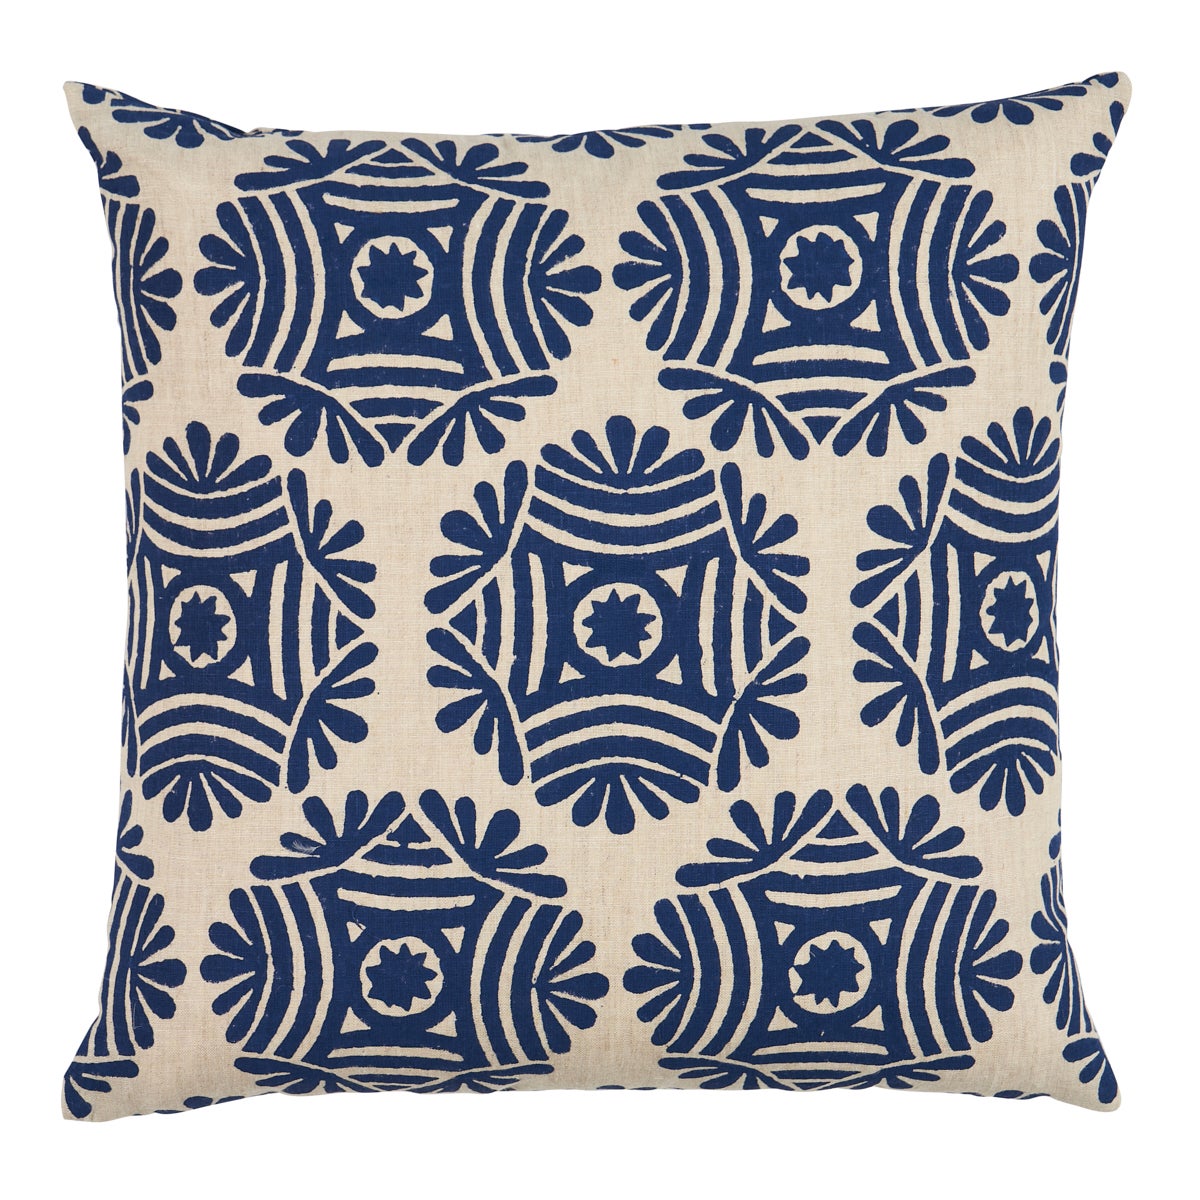 Gilded Star Block Print Pillow in Navy on Natural, 20" For Sale